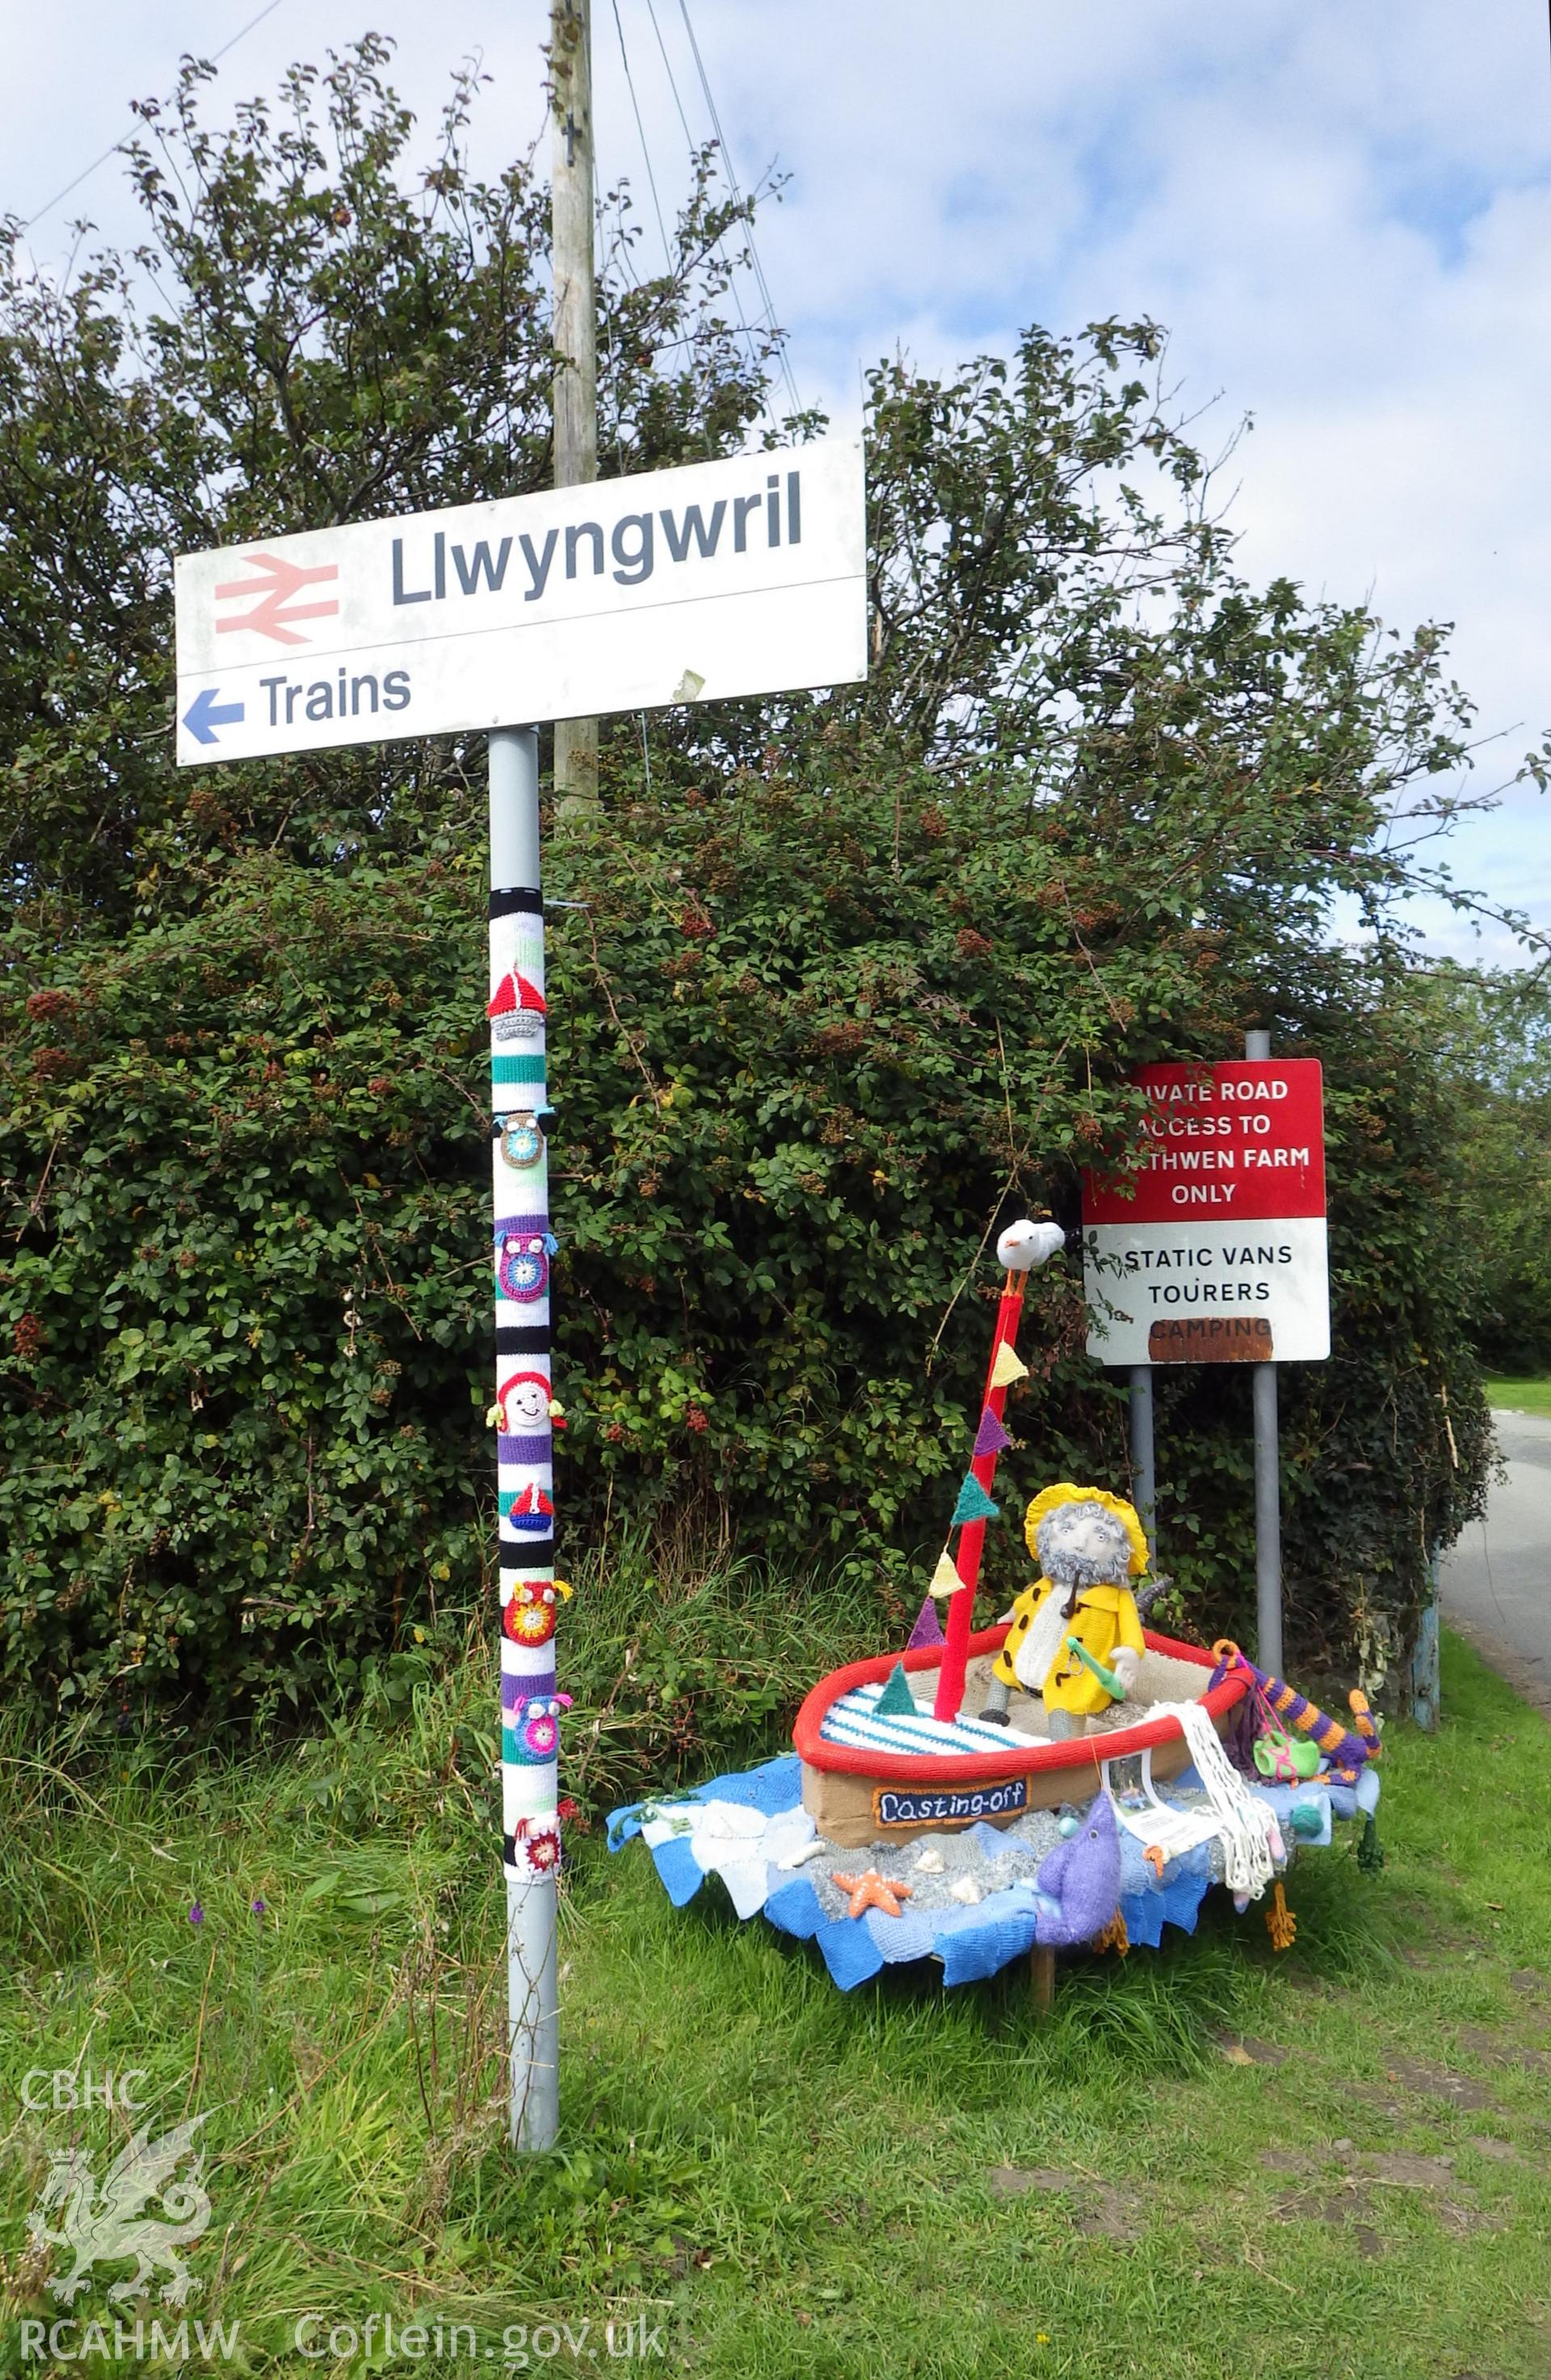 Sailing boat near Llwyngwril station and decorated station sign